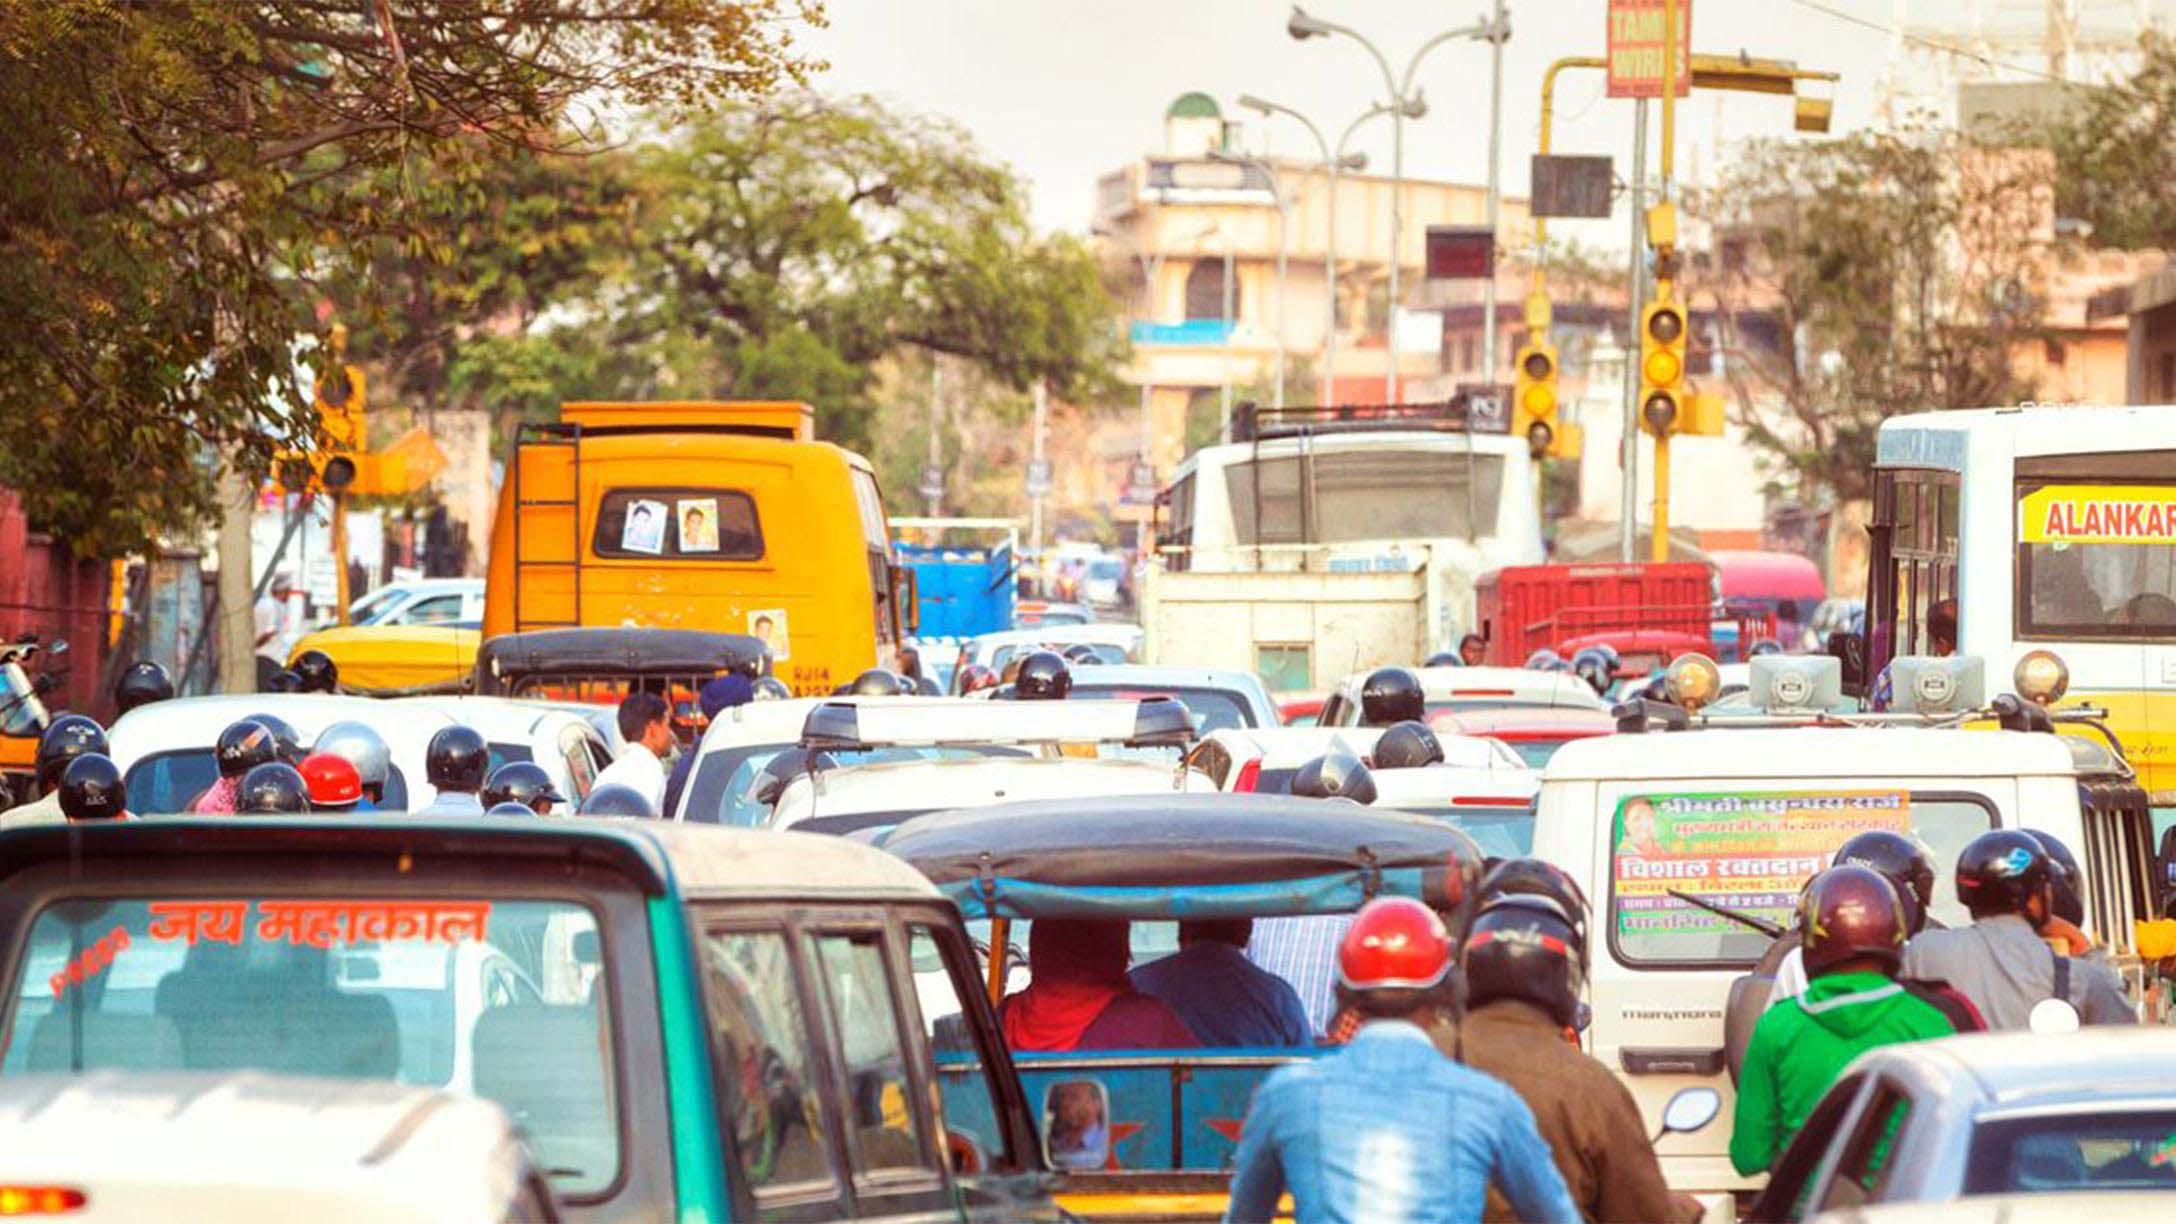 A busy street in India